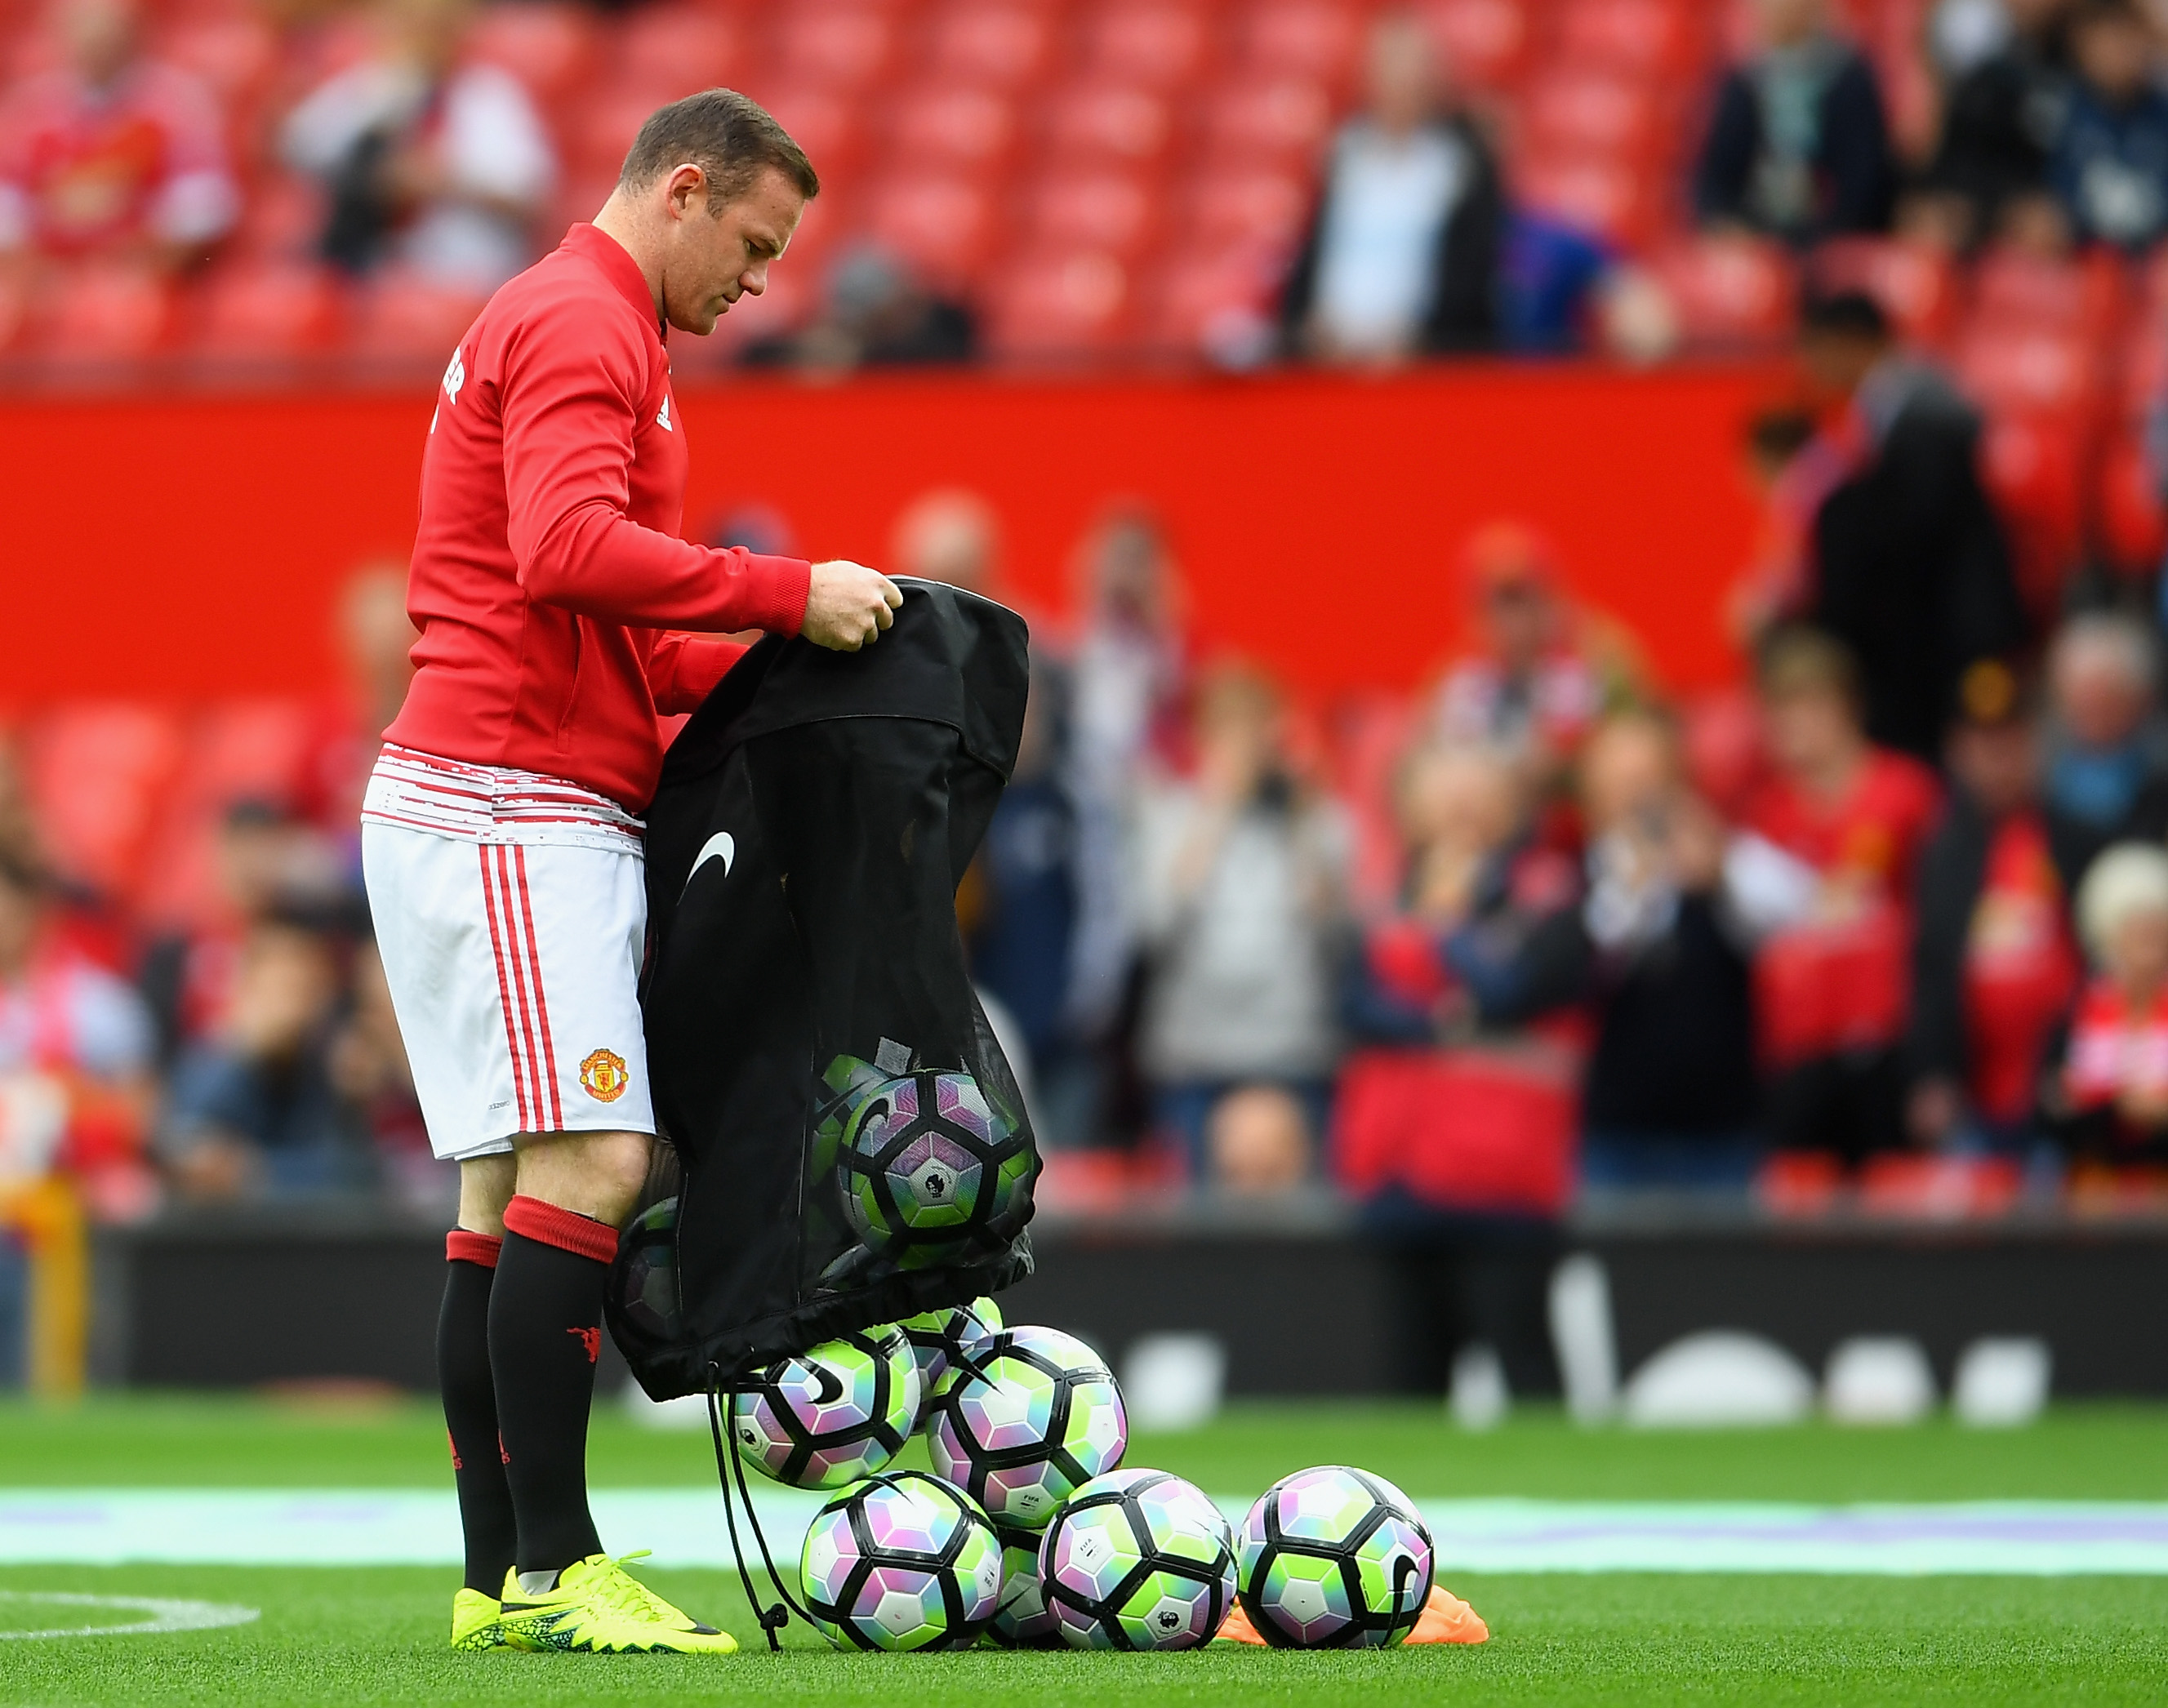 Rooney is likely to be on the bench again as Mourinho aims to keep the momentum going. (Picture Courtesy - AFP/Getty Images)